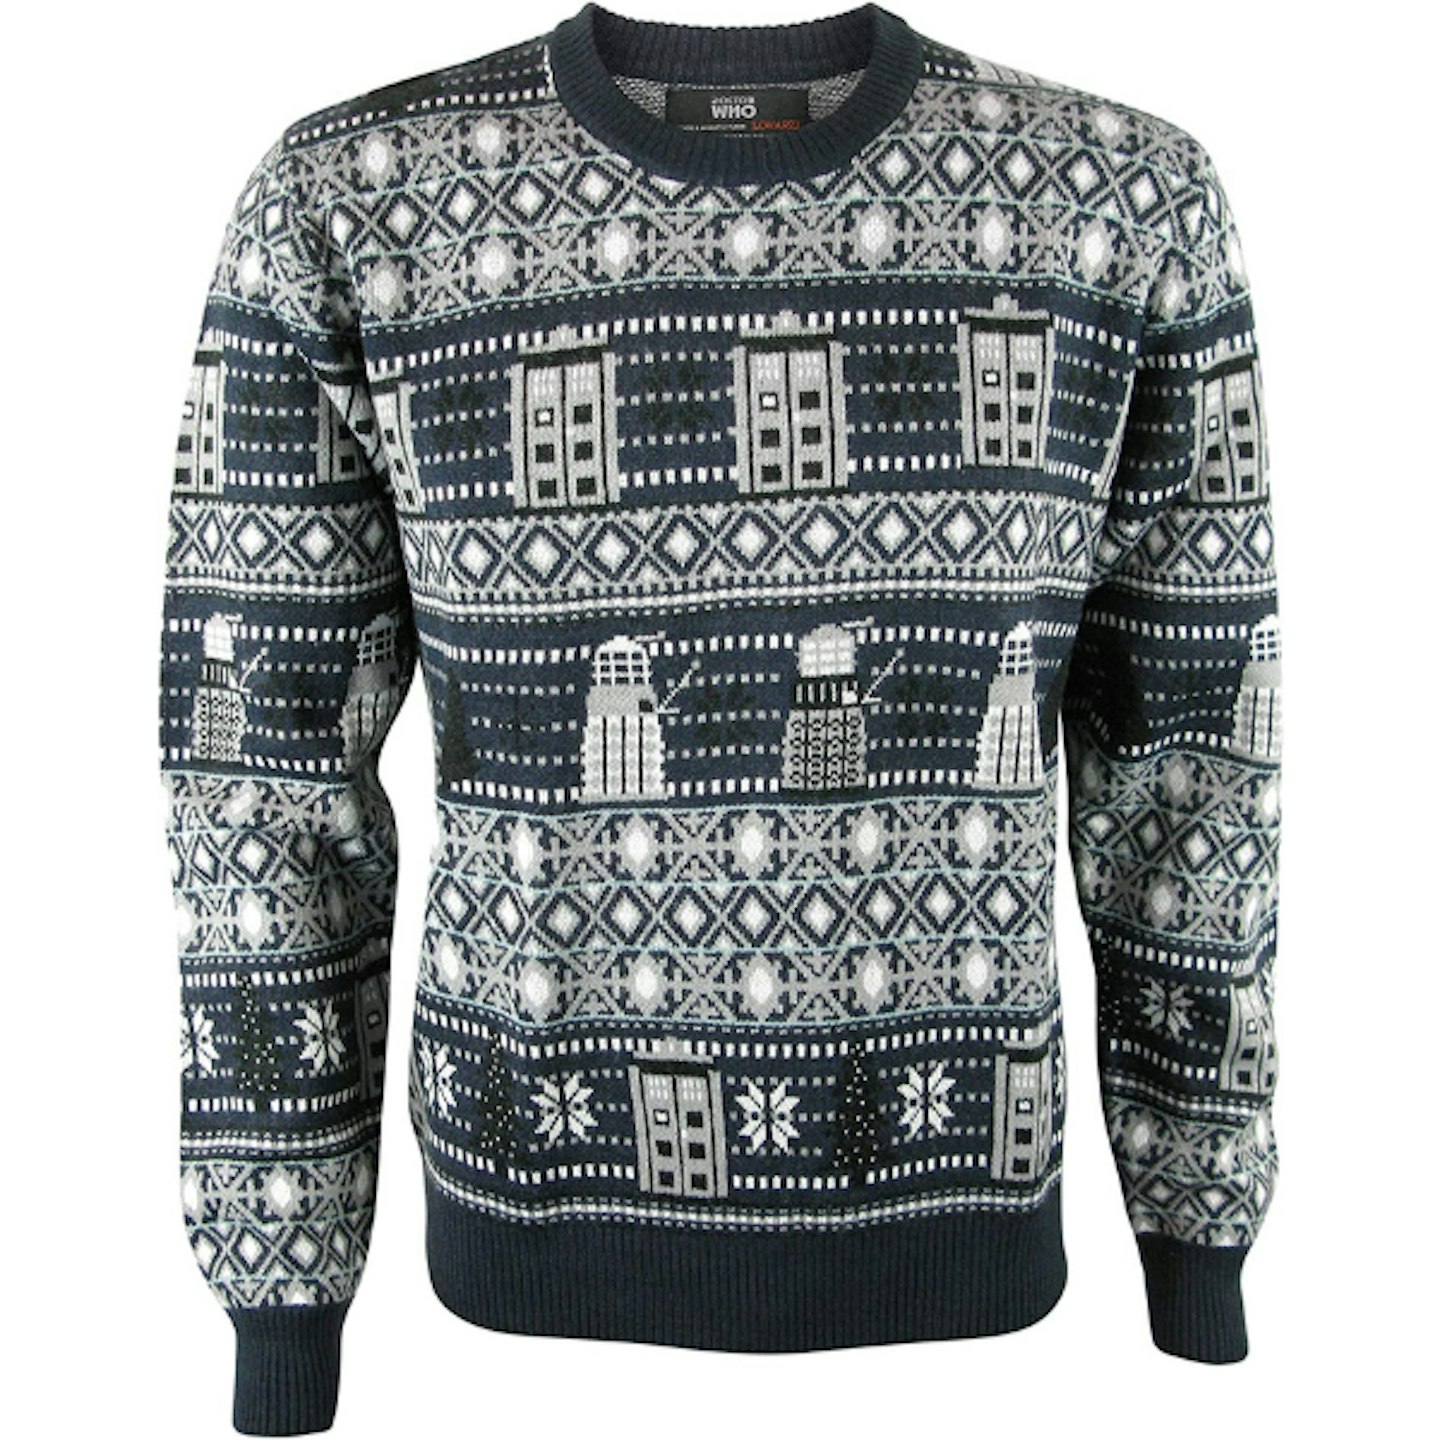 Doctor Who Christmas Jumper